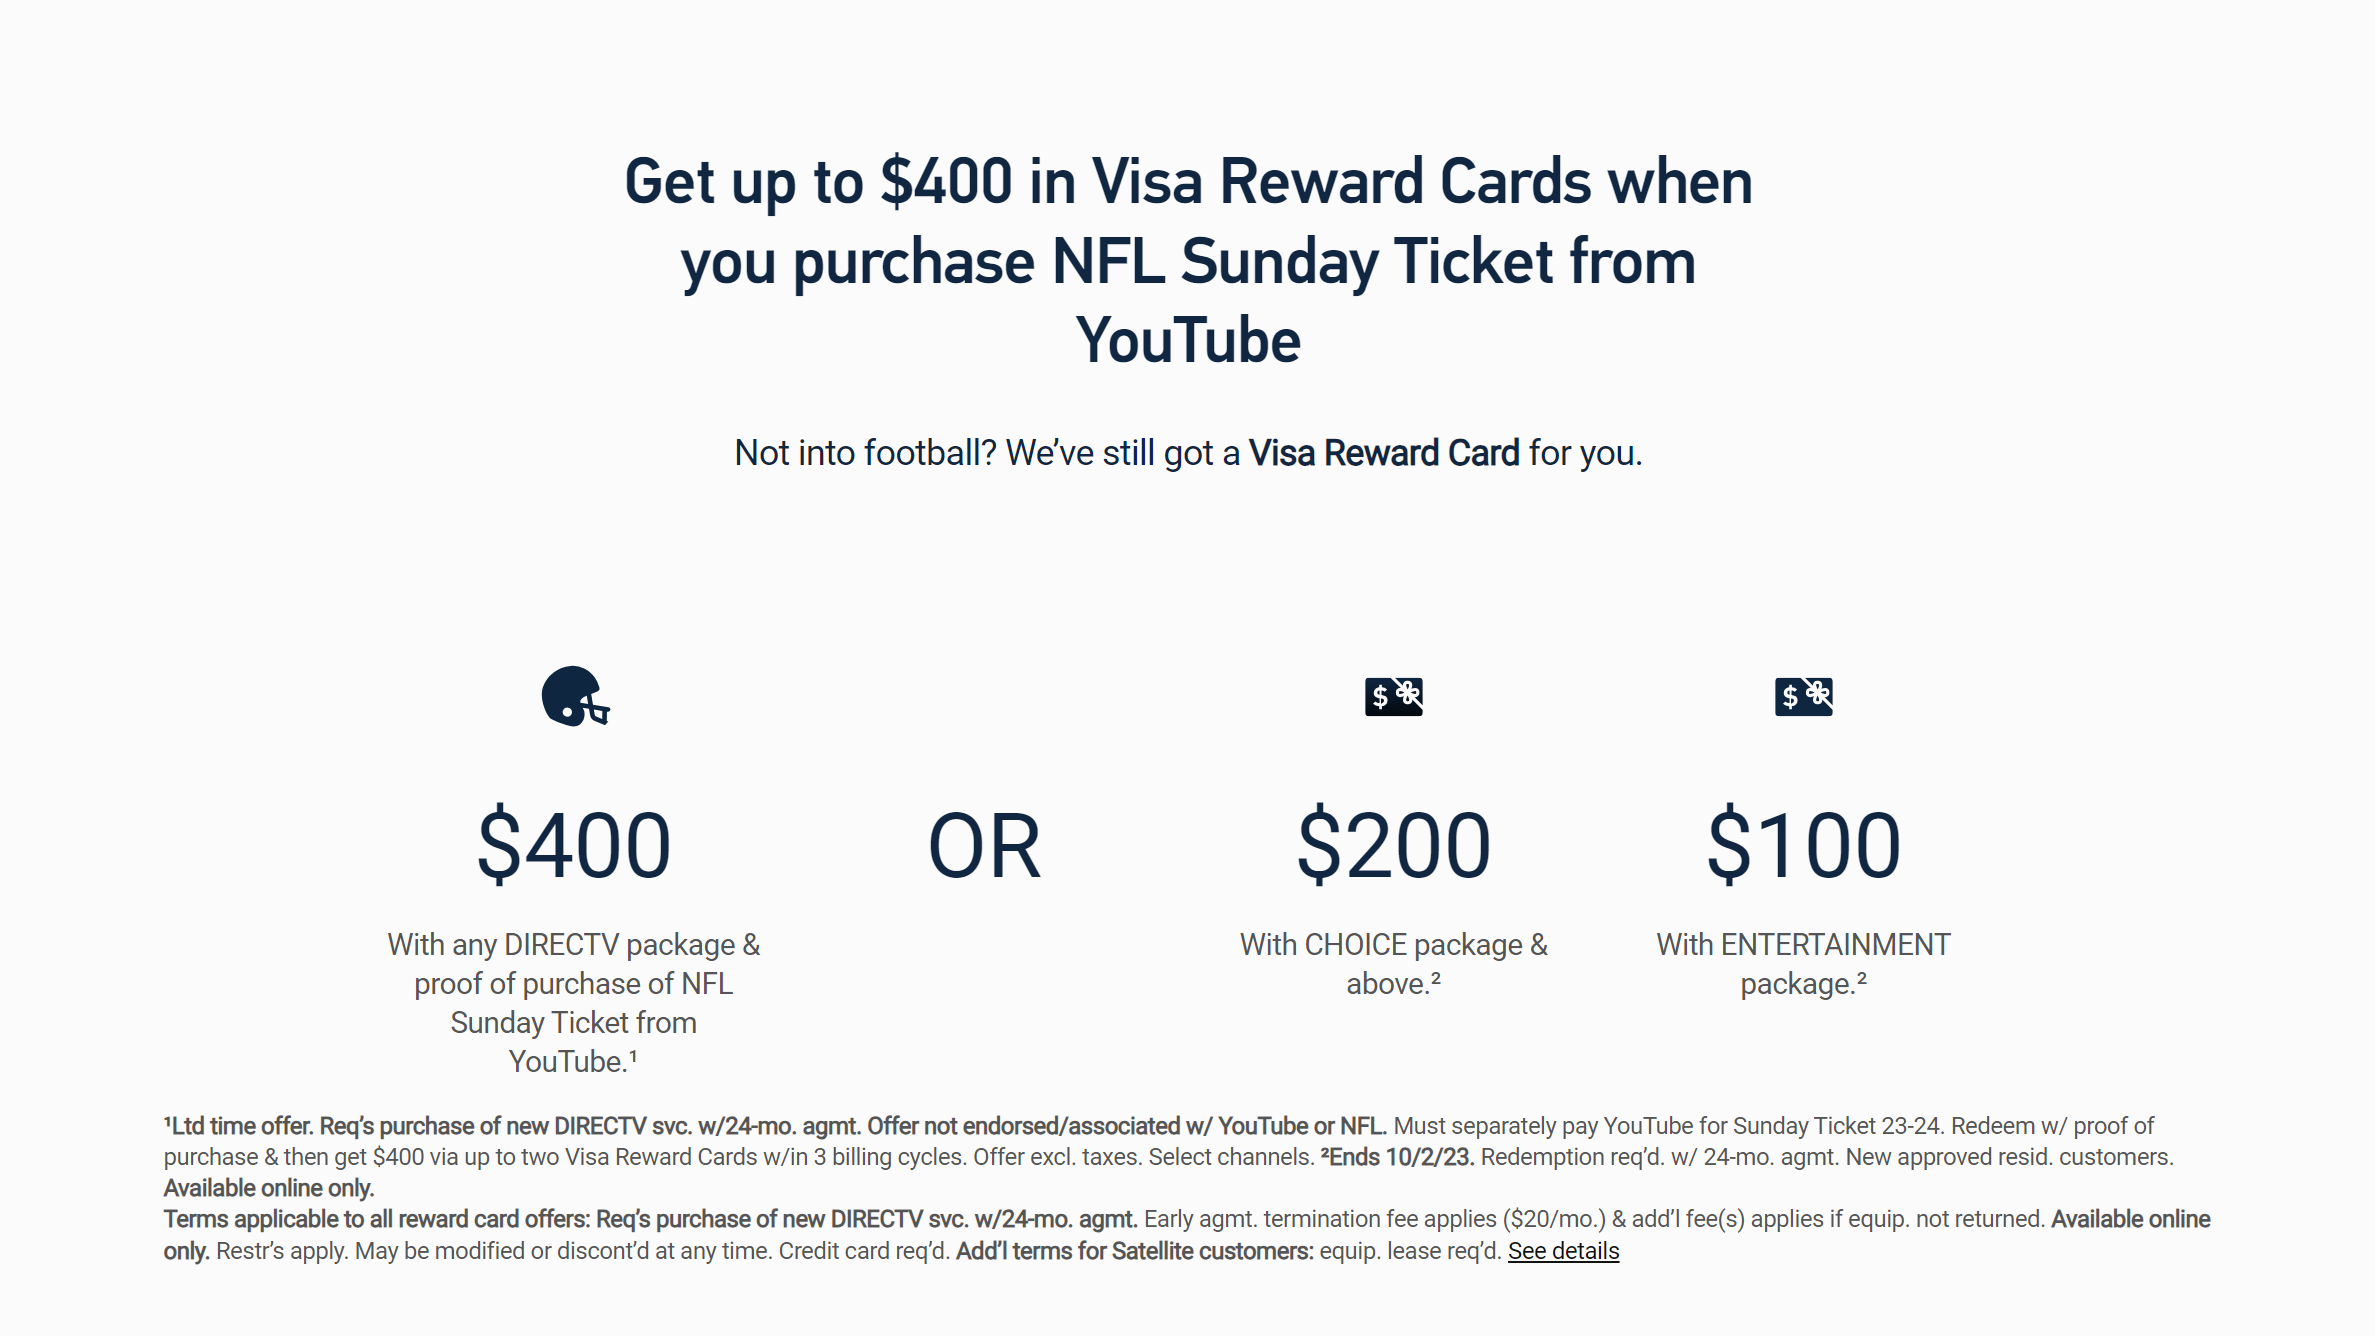 DirecTV is offering free NFL Sunday Ticket — but there's a catch